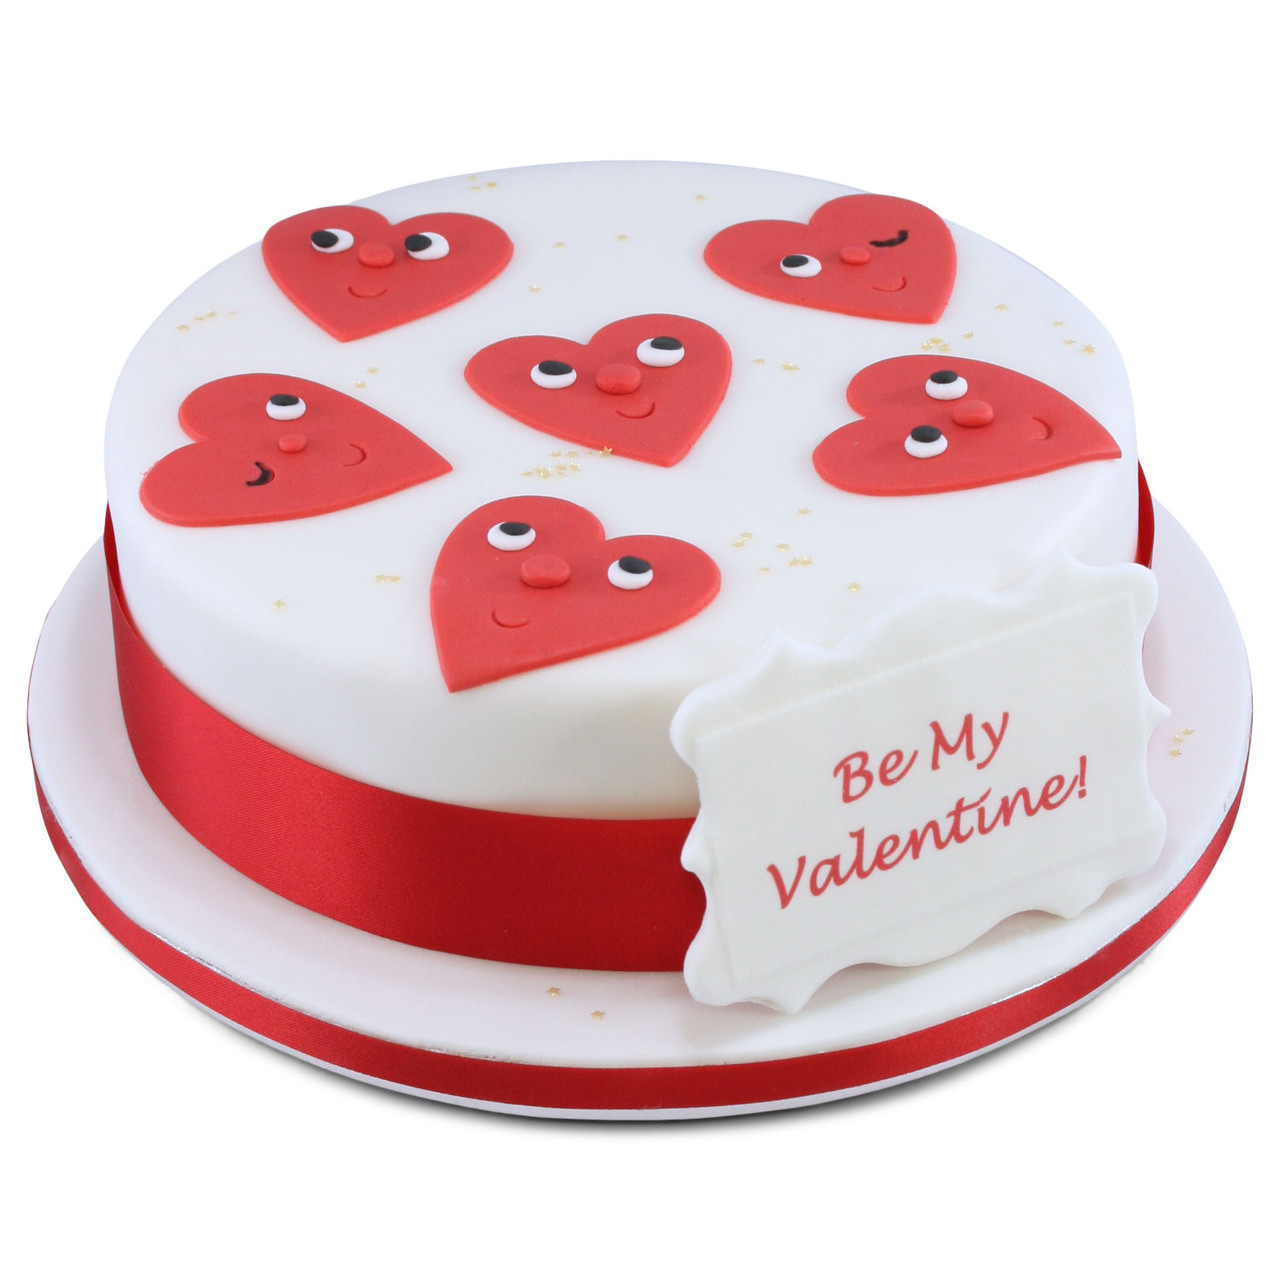 Designer Cakes Ideas for Sweetheart this Valentine's Day - Kingdom of Cakes